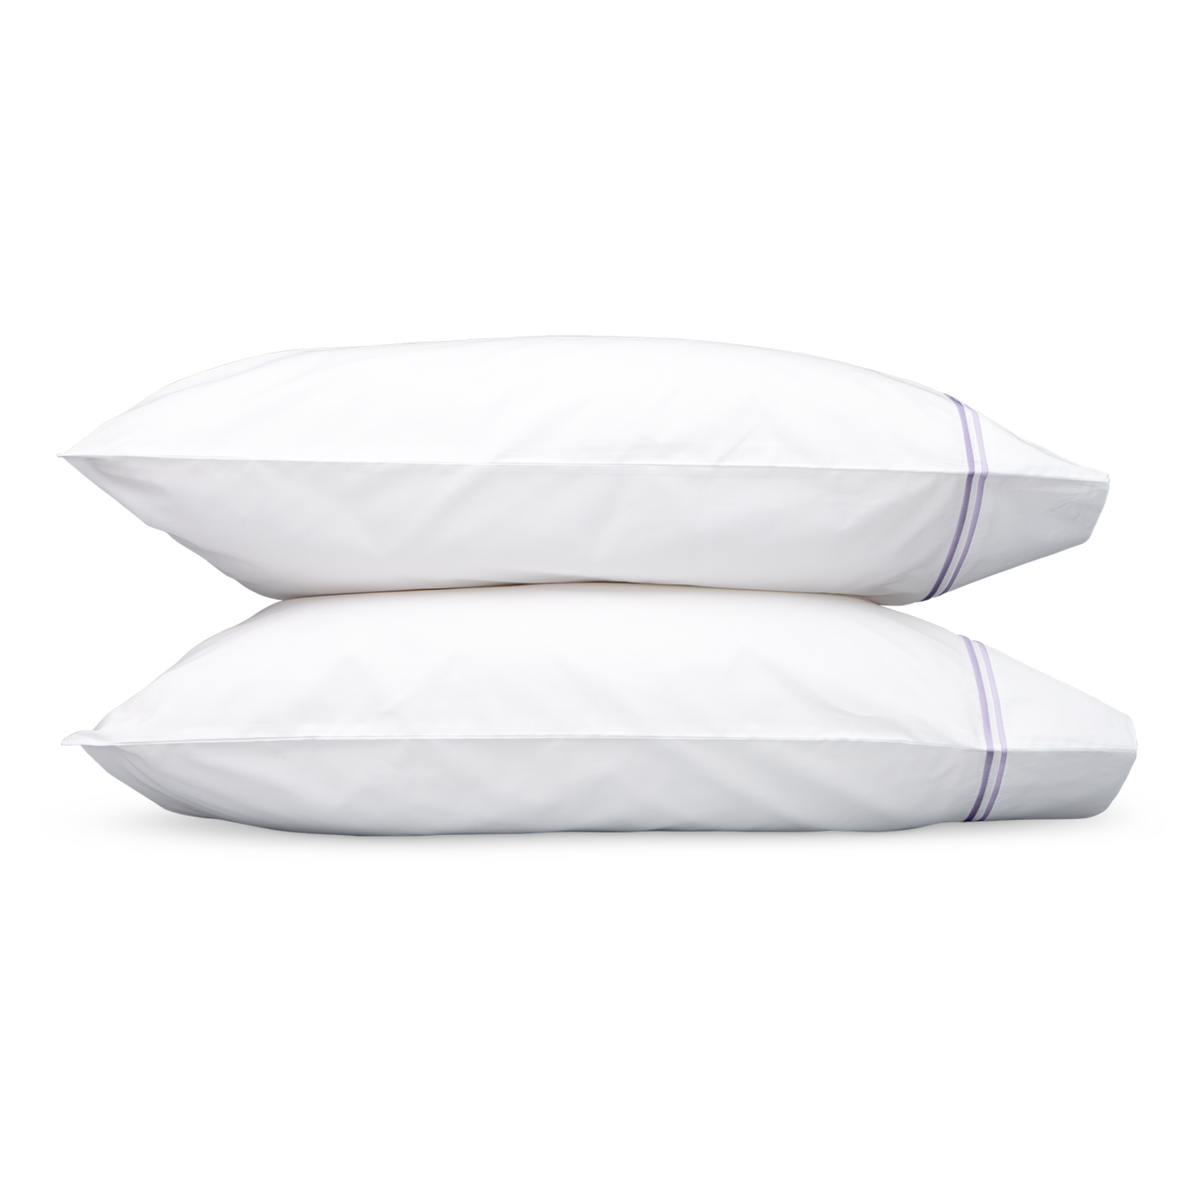 Pair of Pillowcases in Lilac Color Matouk Essex Bedding Collection